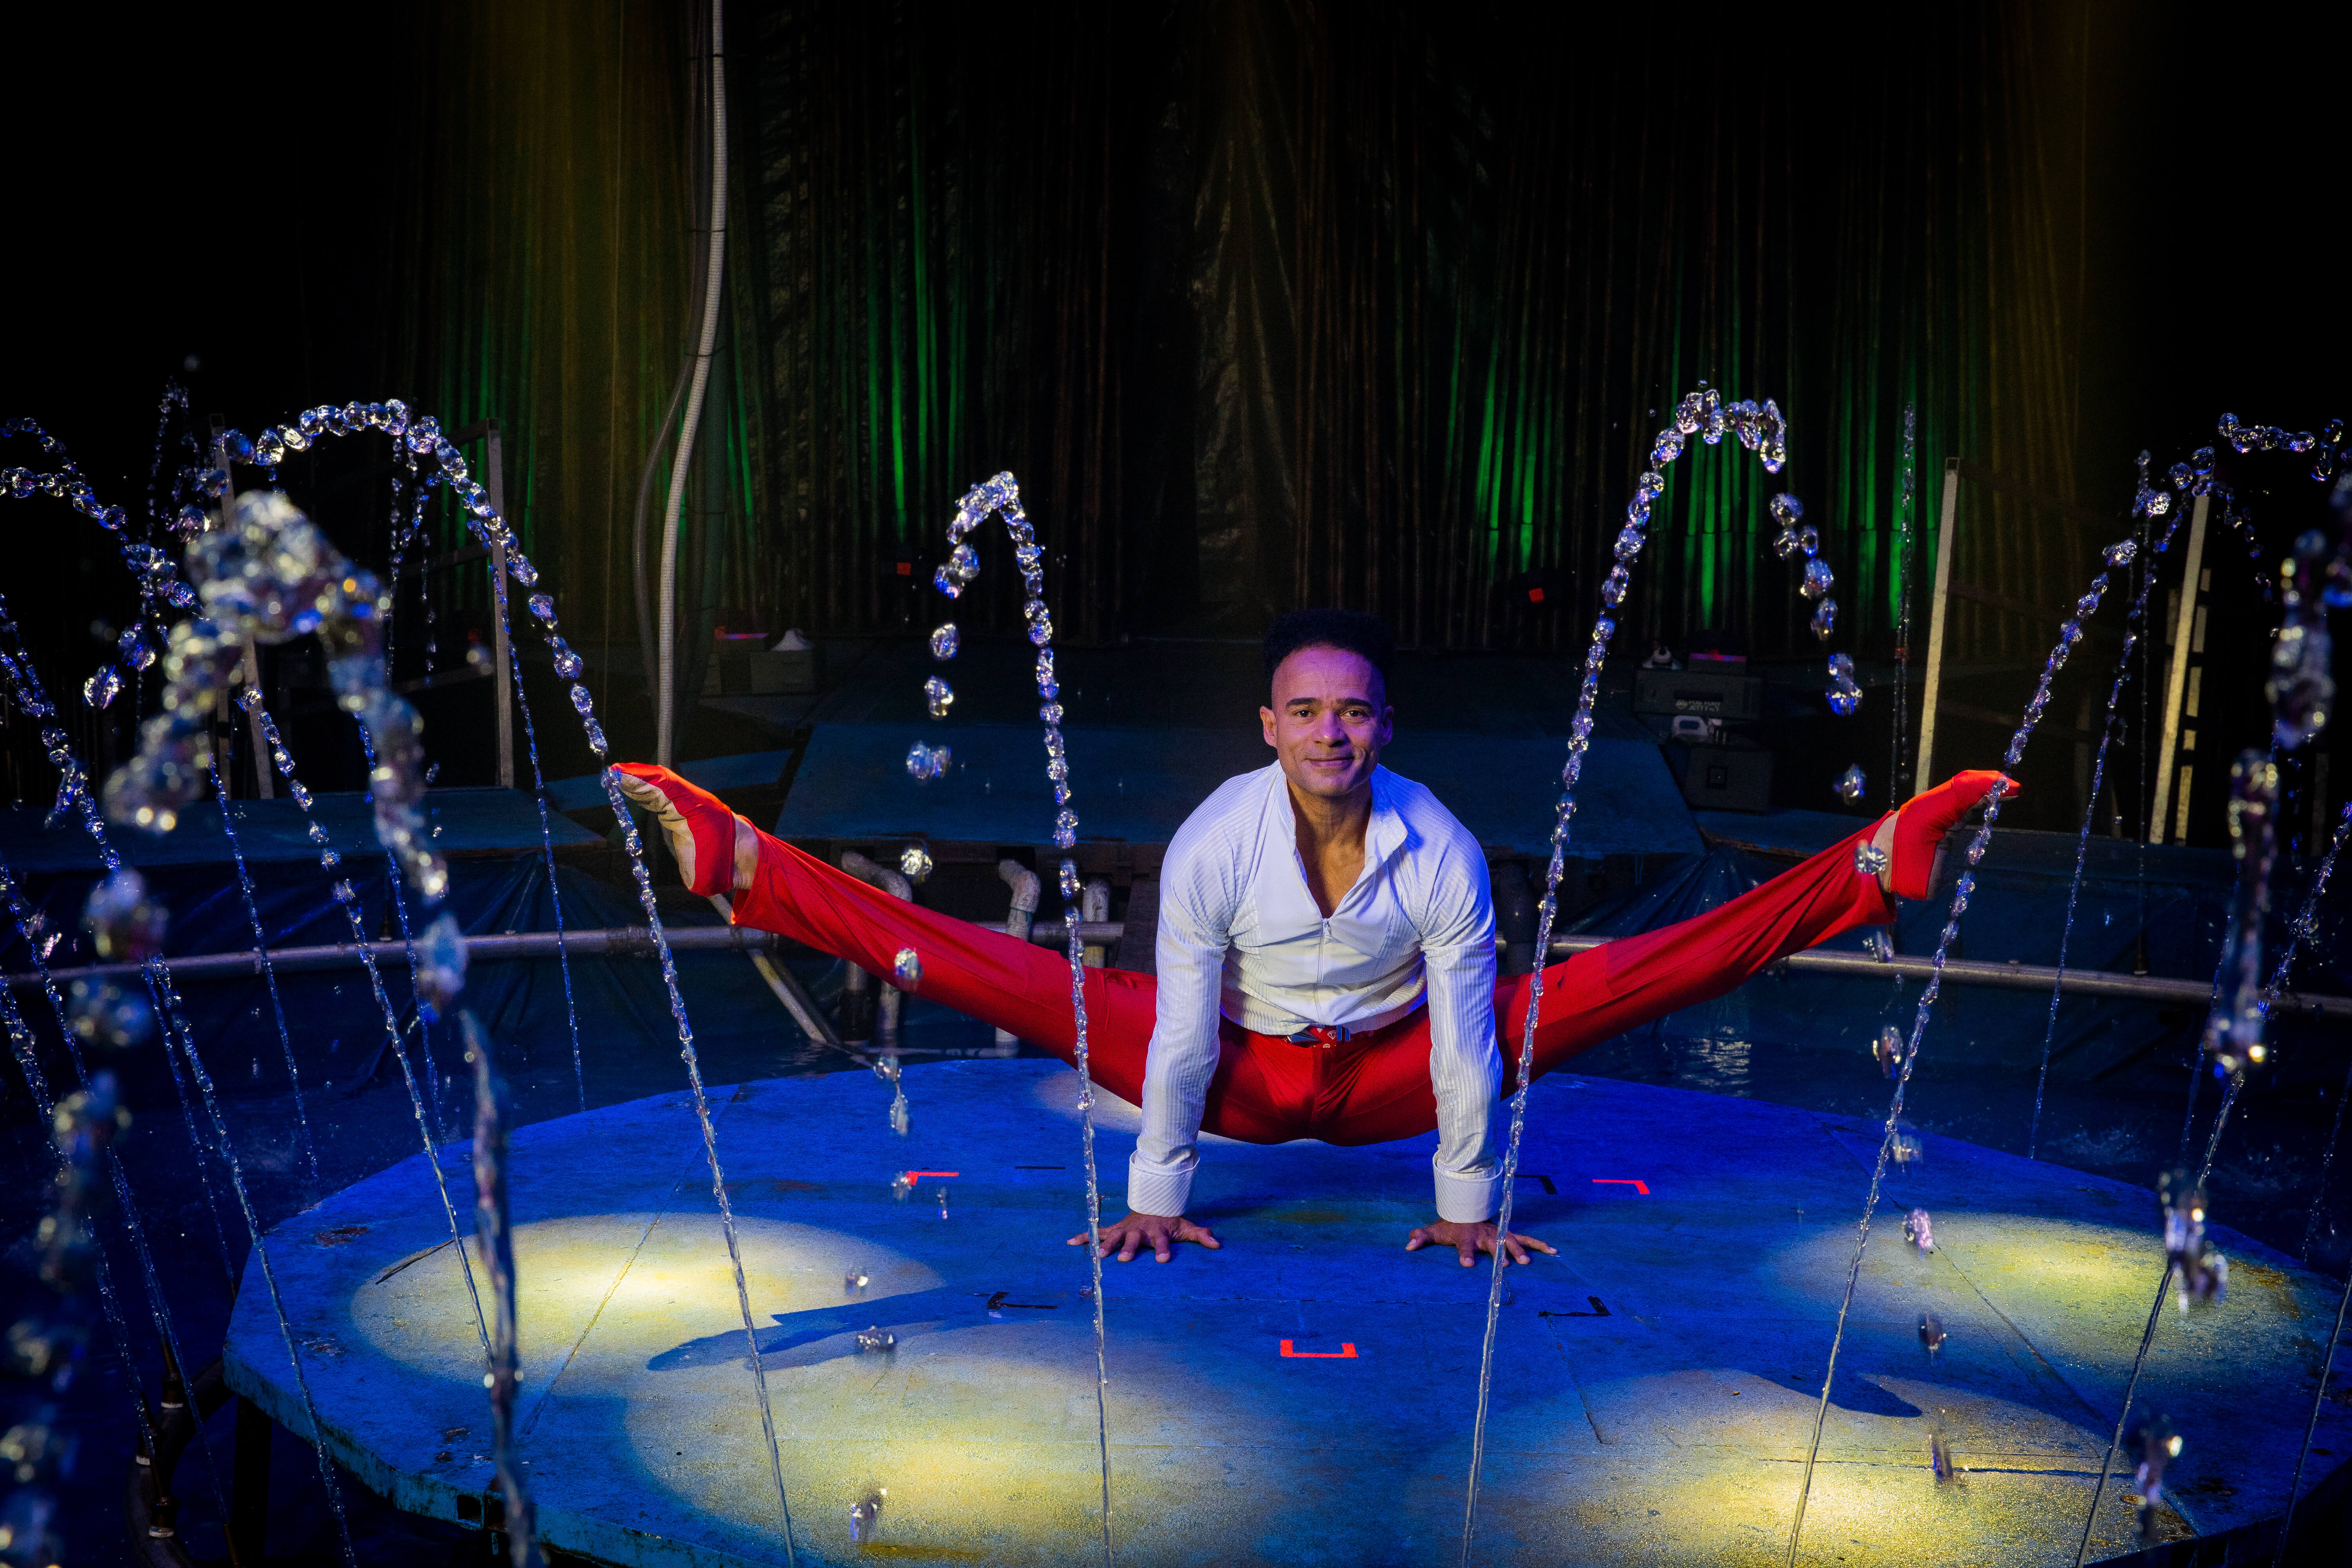 Traveling Water Circus returns to the Grove City Premium Outlet Mall in Mercer County, PA